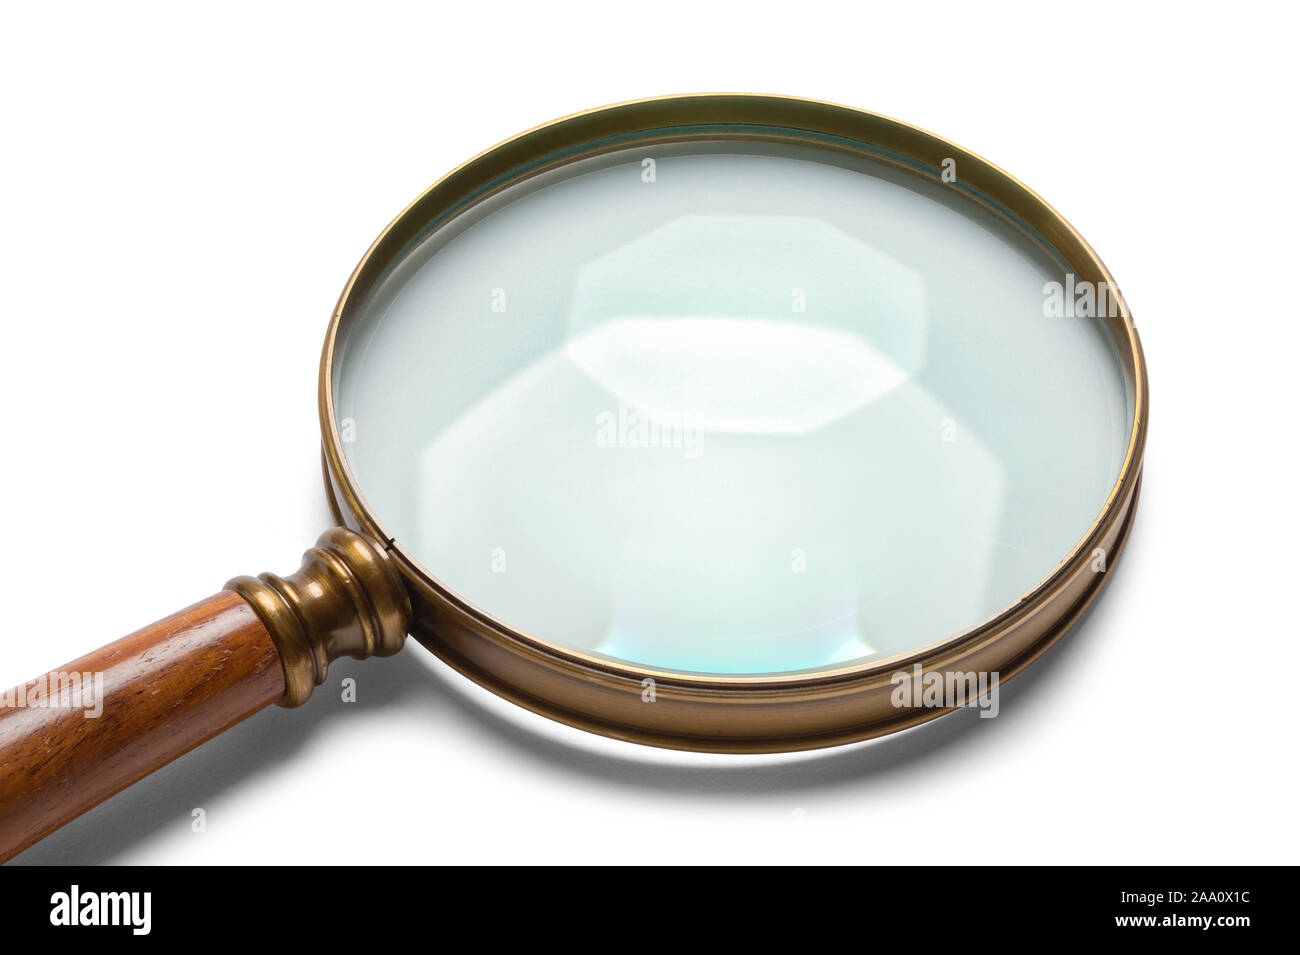 Brass Magnifying Glass with Wood Handle Close Up Isolated on White Background. Stock Photo